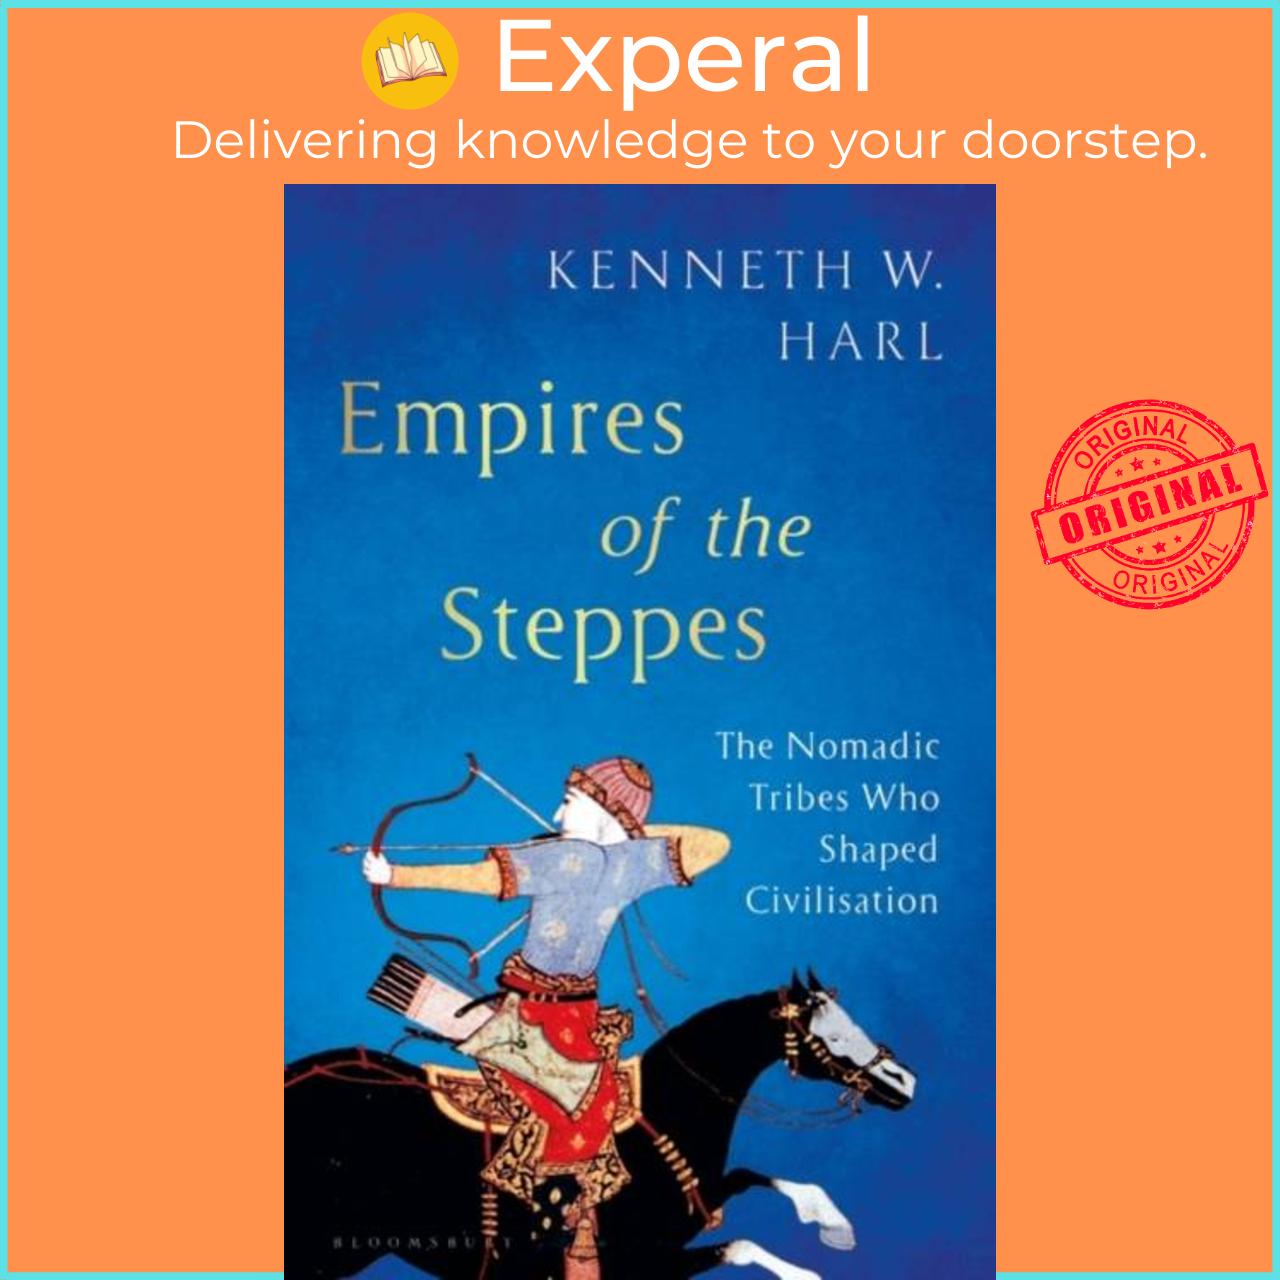 Hình ảnh Sách - Empires of the Steppes - The Nomadic Tribes Who Shaped Civilisation by Kenneth W. Harl (UK edition, hardcover)